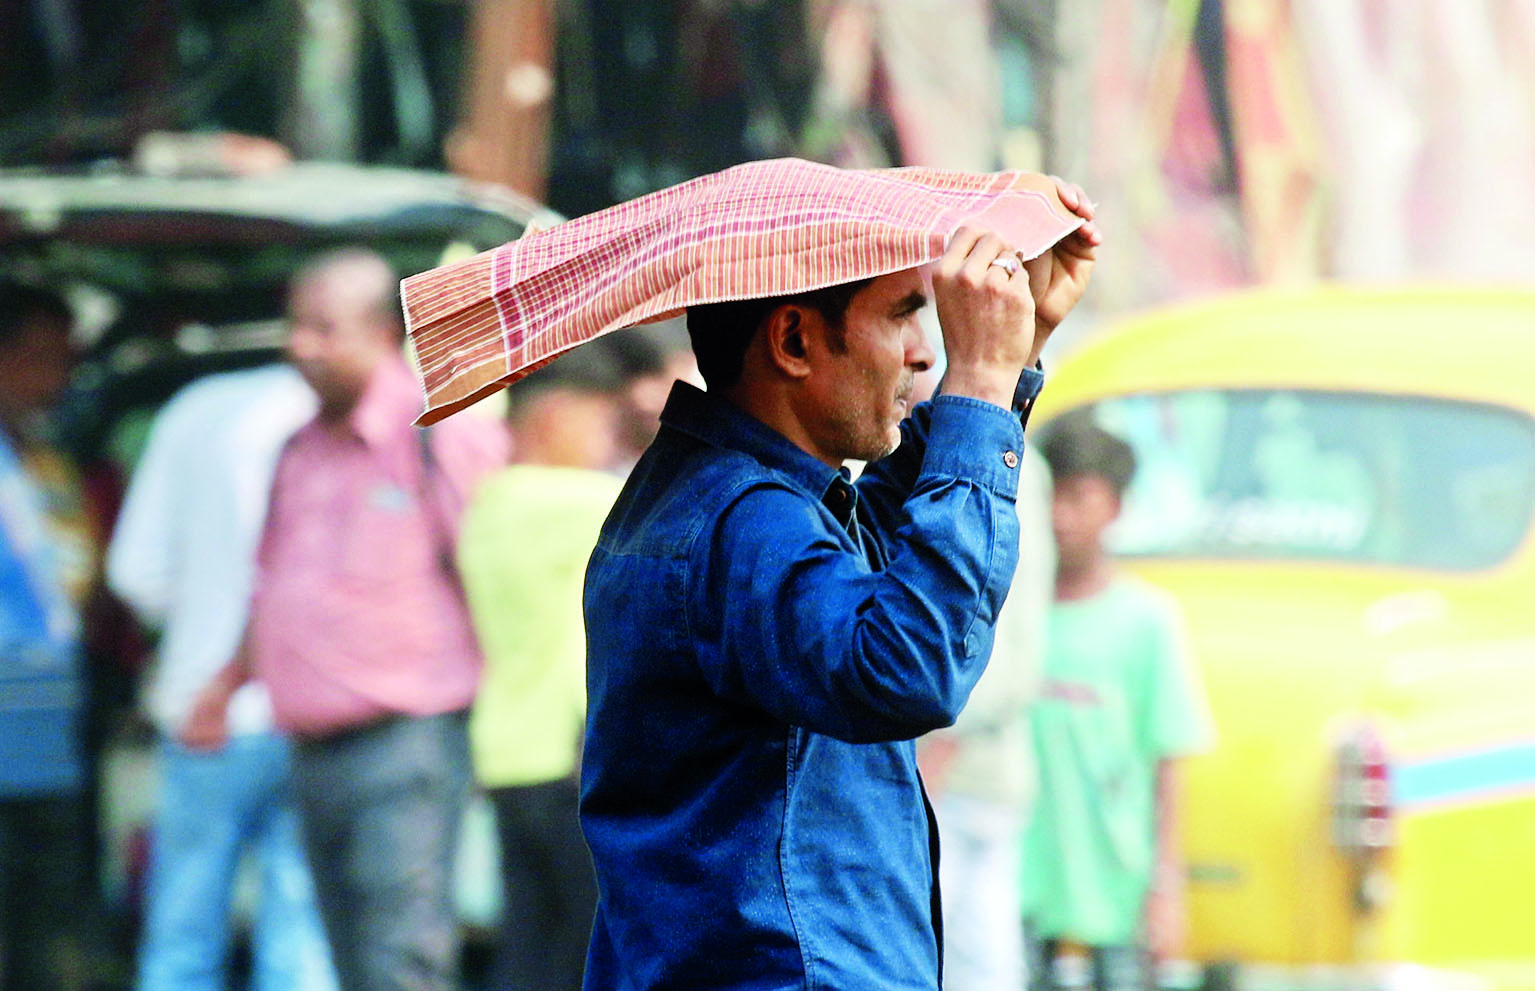 Respite in sight: ‘Mercury likely to dip in next 48 hrs’ 